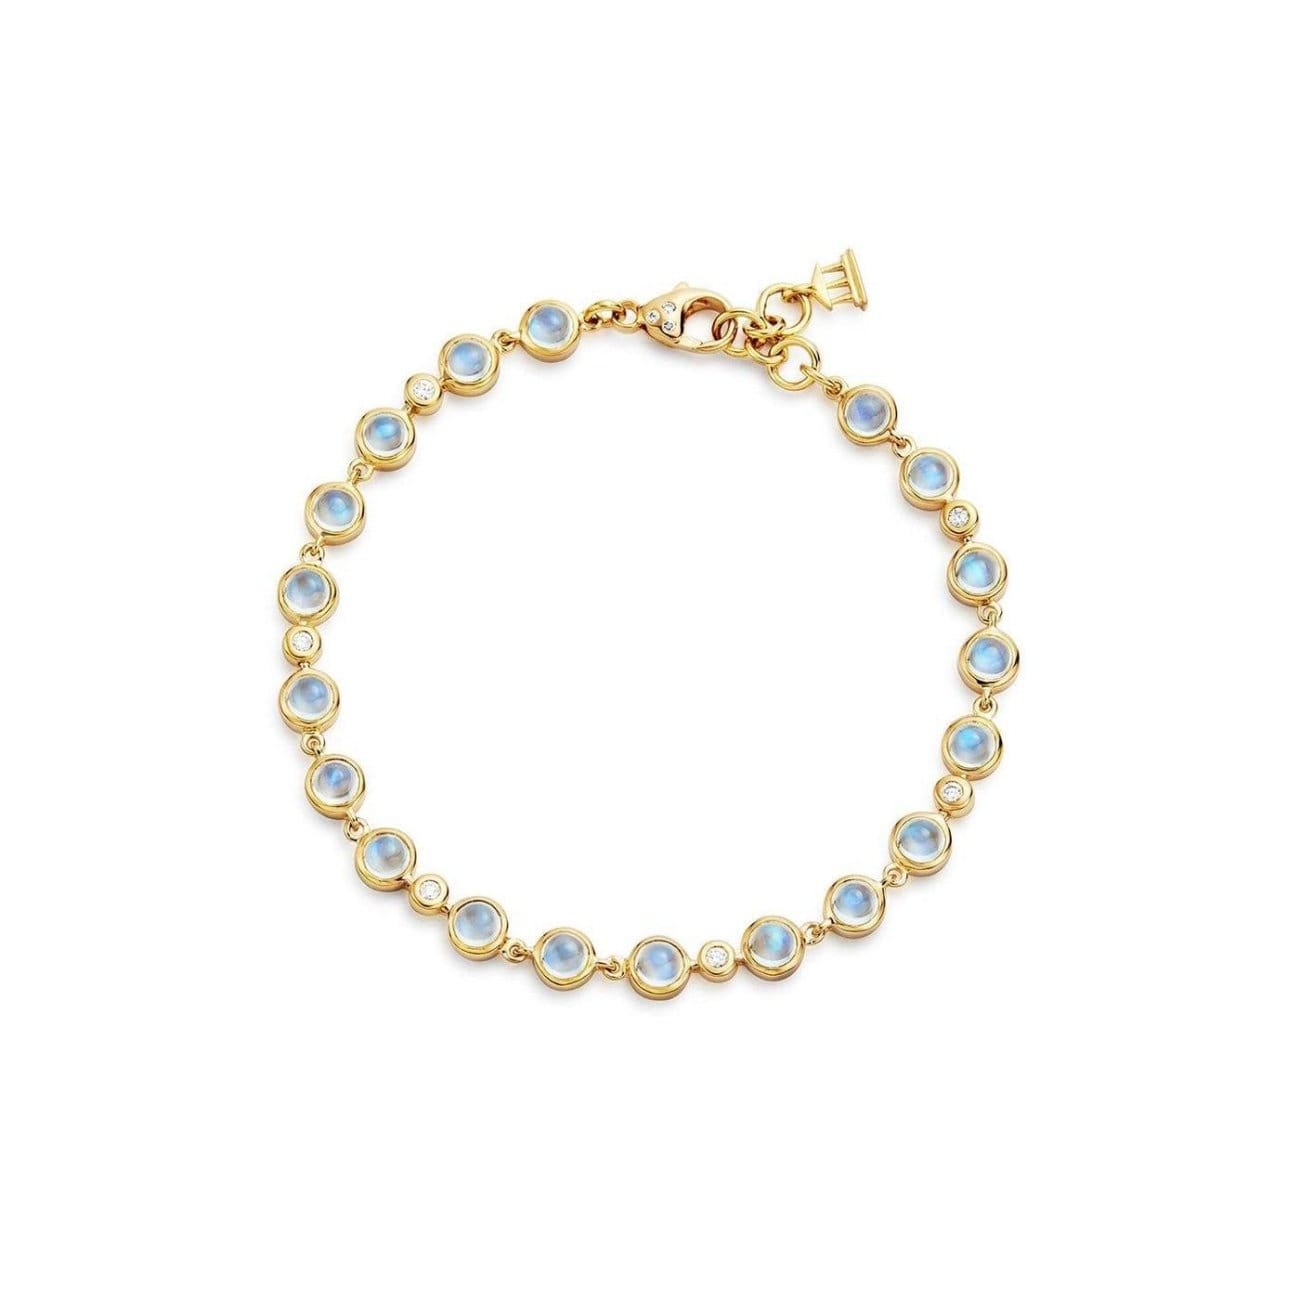 https://www.manfredijewels.com/collections/jewelry/products/18k-blue-moon-link-bracelet